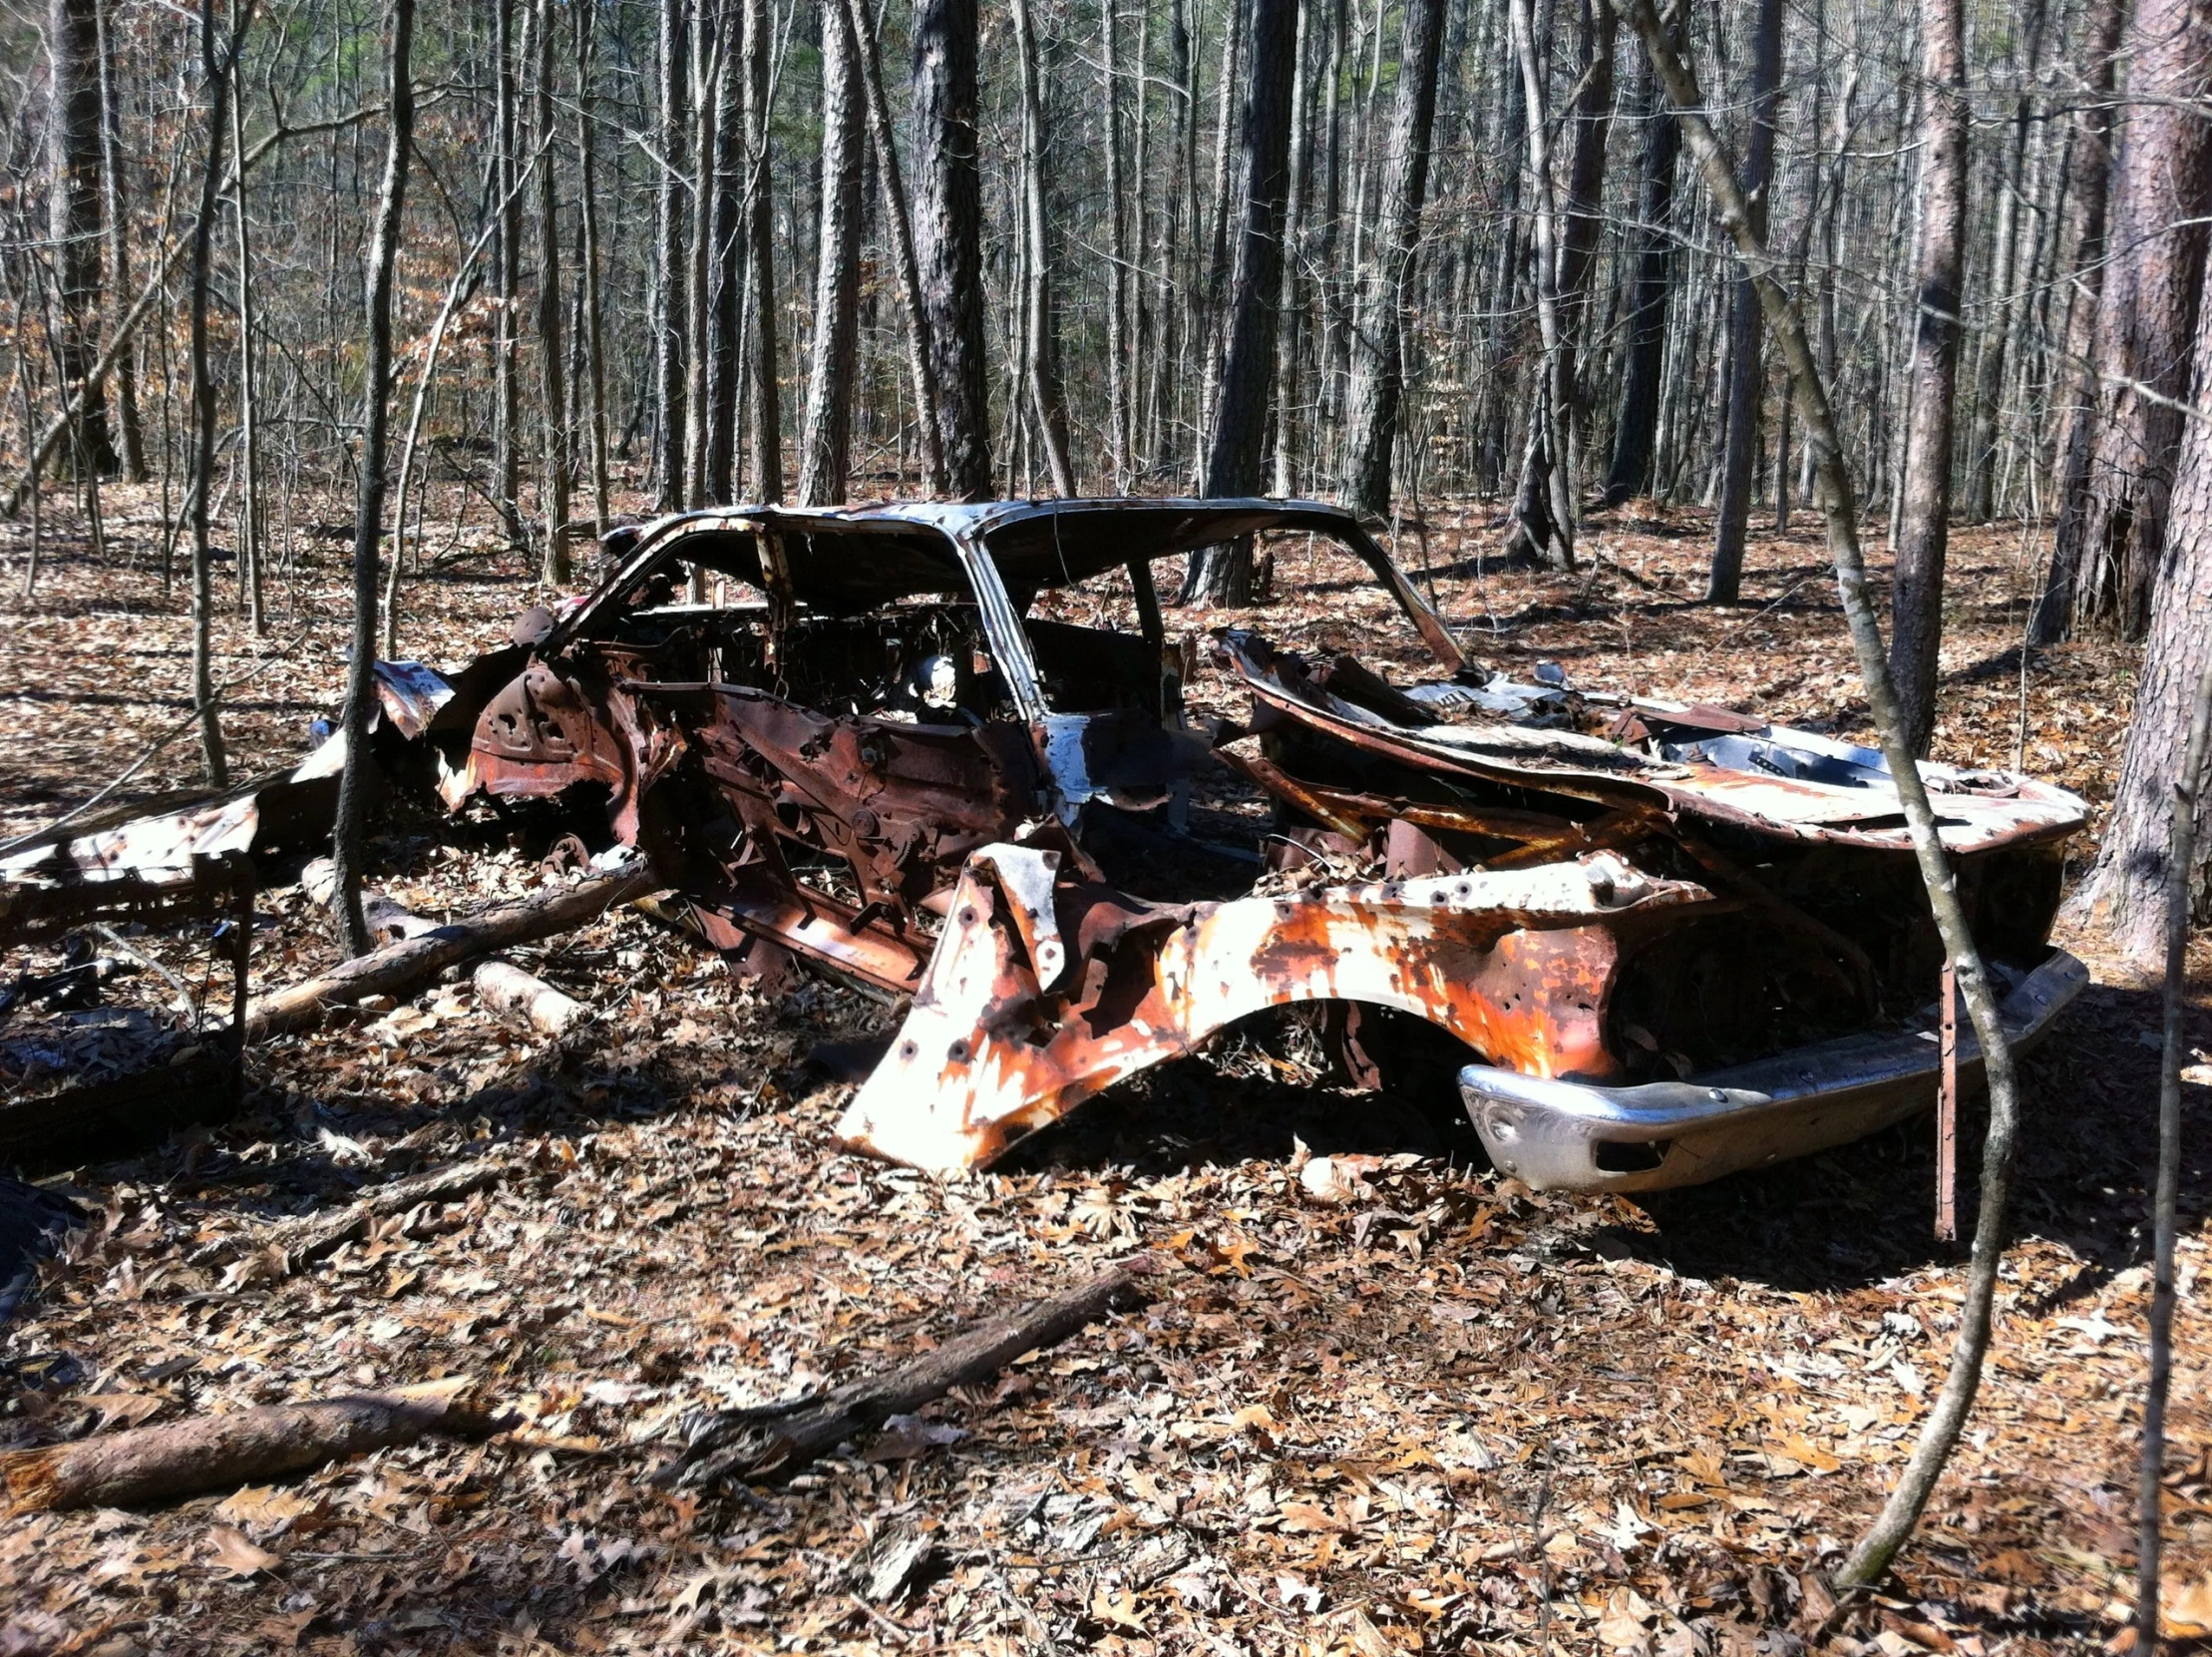 an old rusty rusted car sitting in the woods